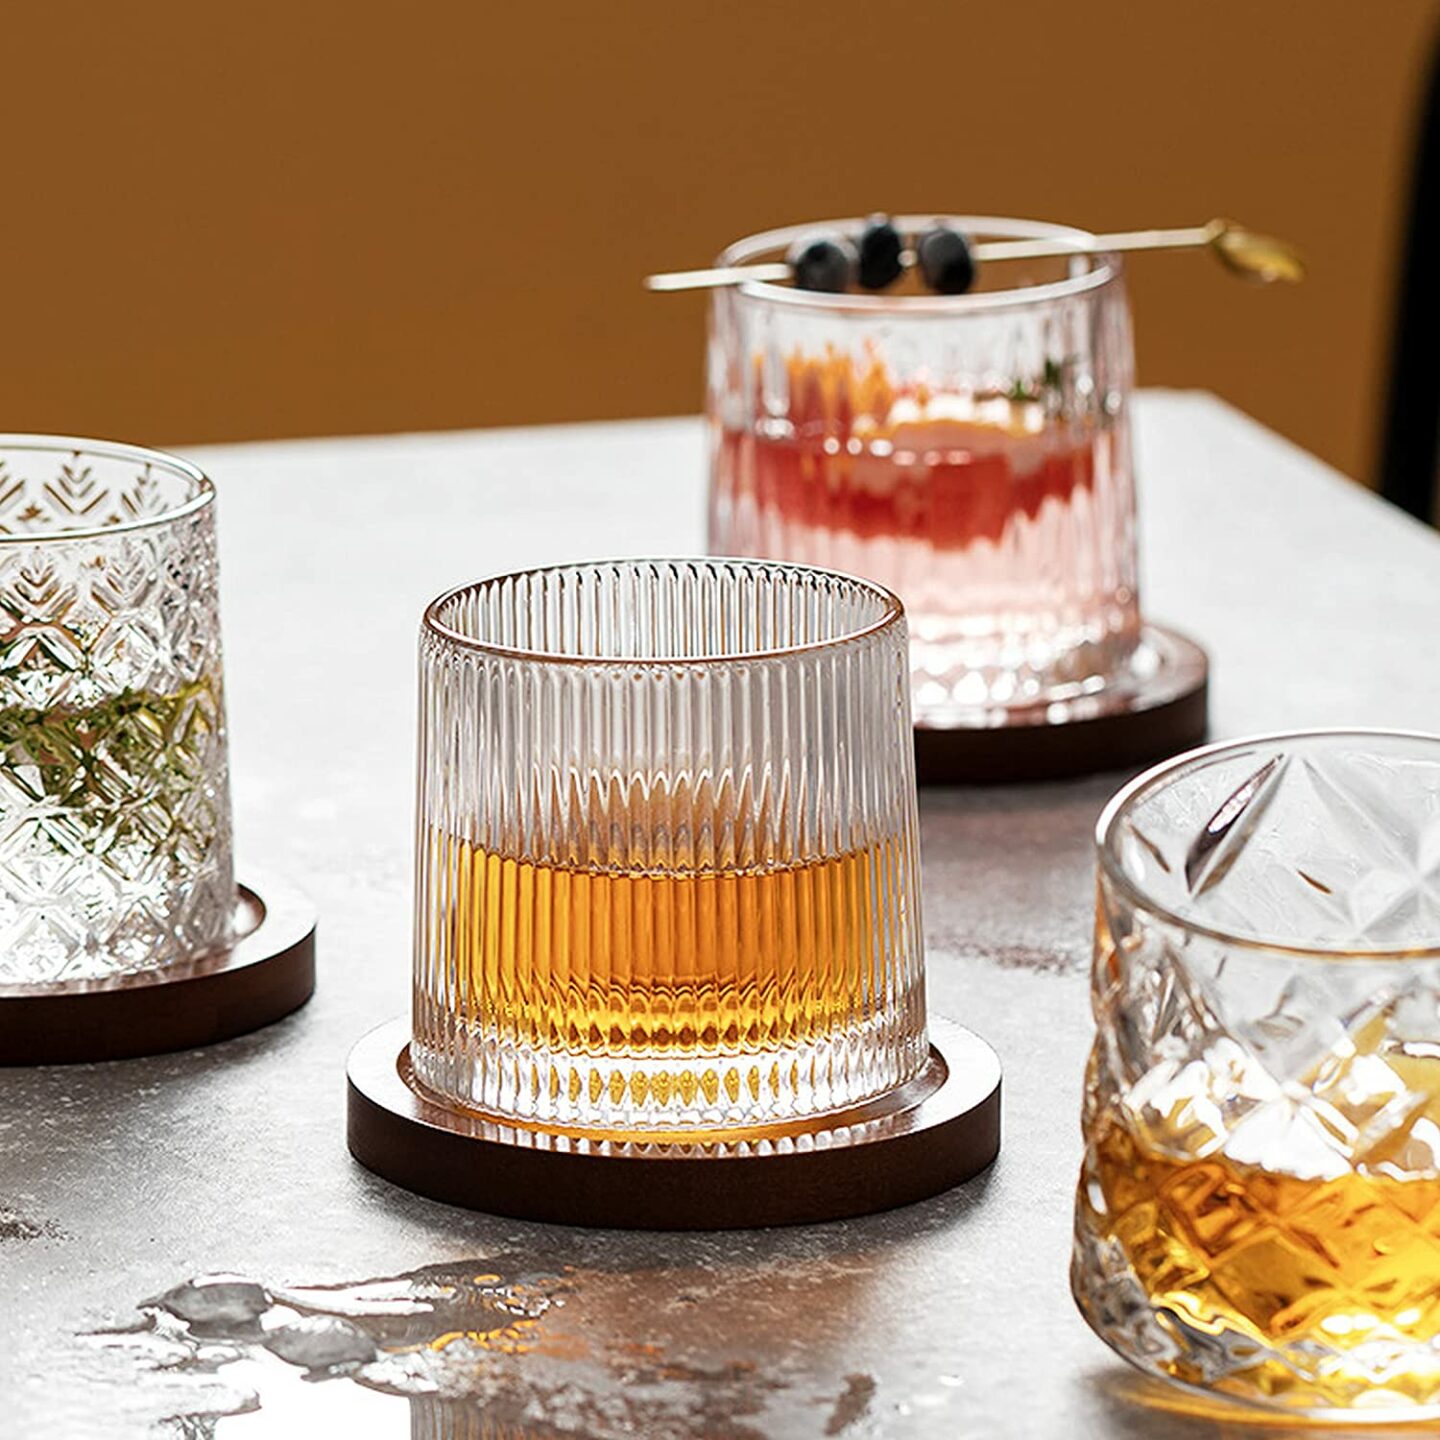 13 of The Best Cocktail Glasses for Your Home Bar